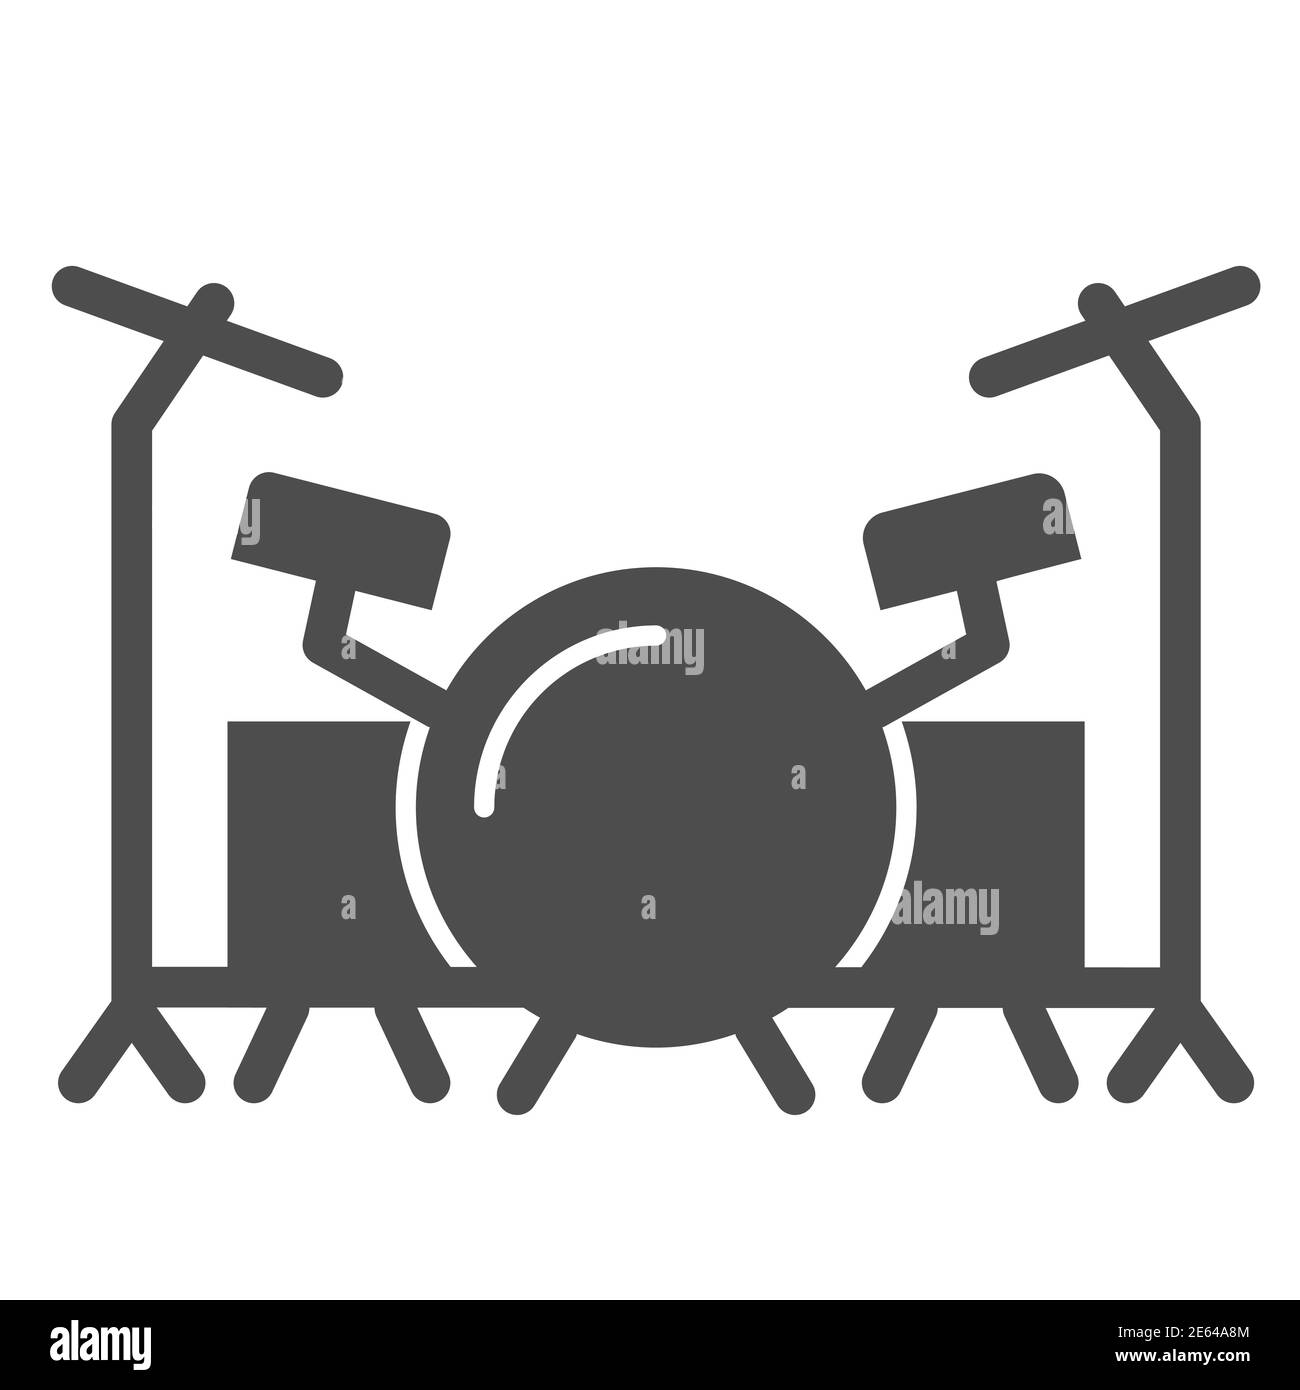 Drums solid icon, Music festival concept, drum set sign on white background, Drum kit icon in glyph style for mobile concept and web design. Vector Stock Vector